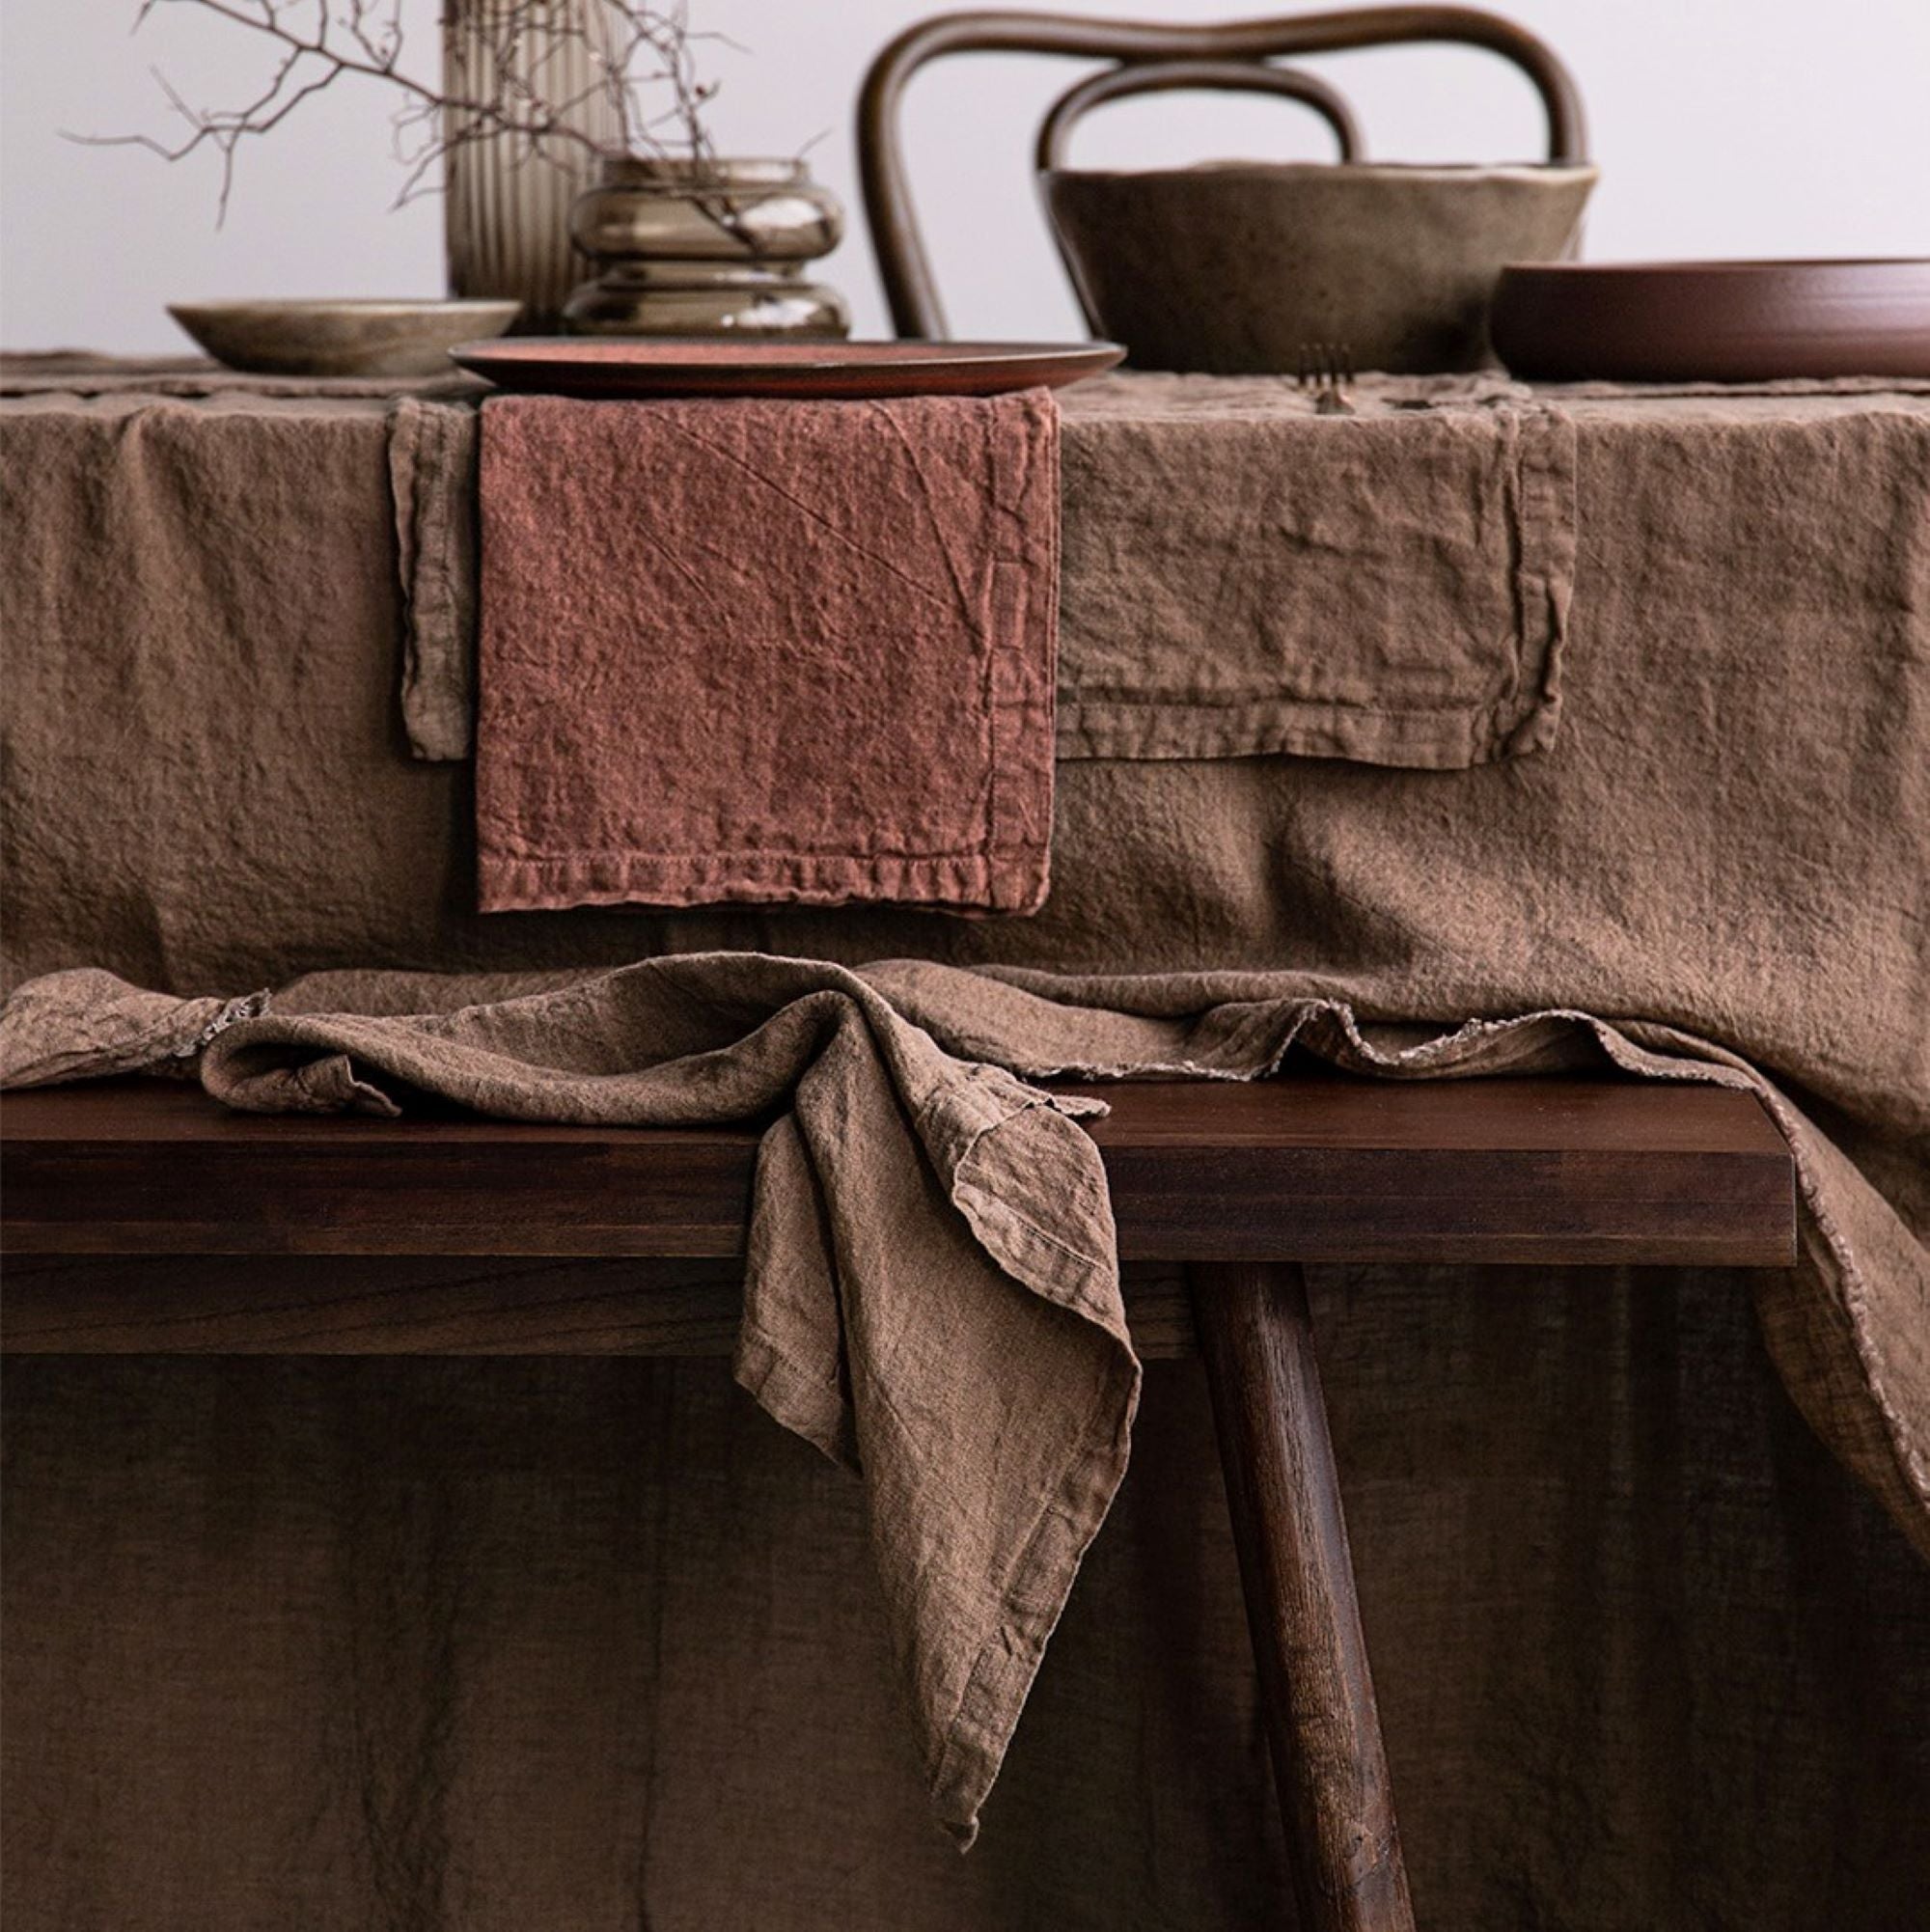 Linen Napkins | Muted Mulberry  | Hale Mercantile Co.